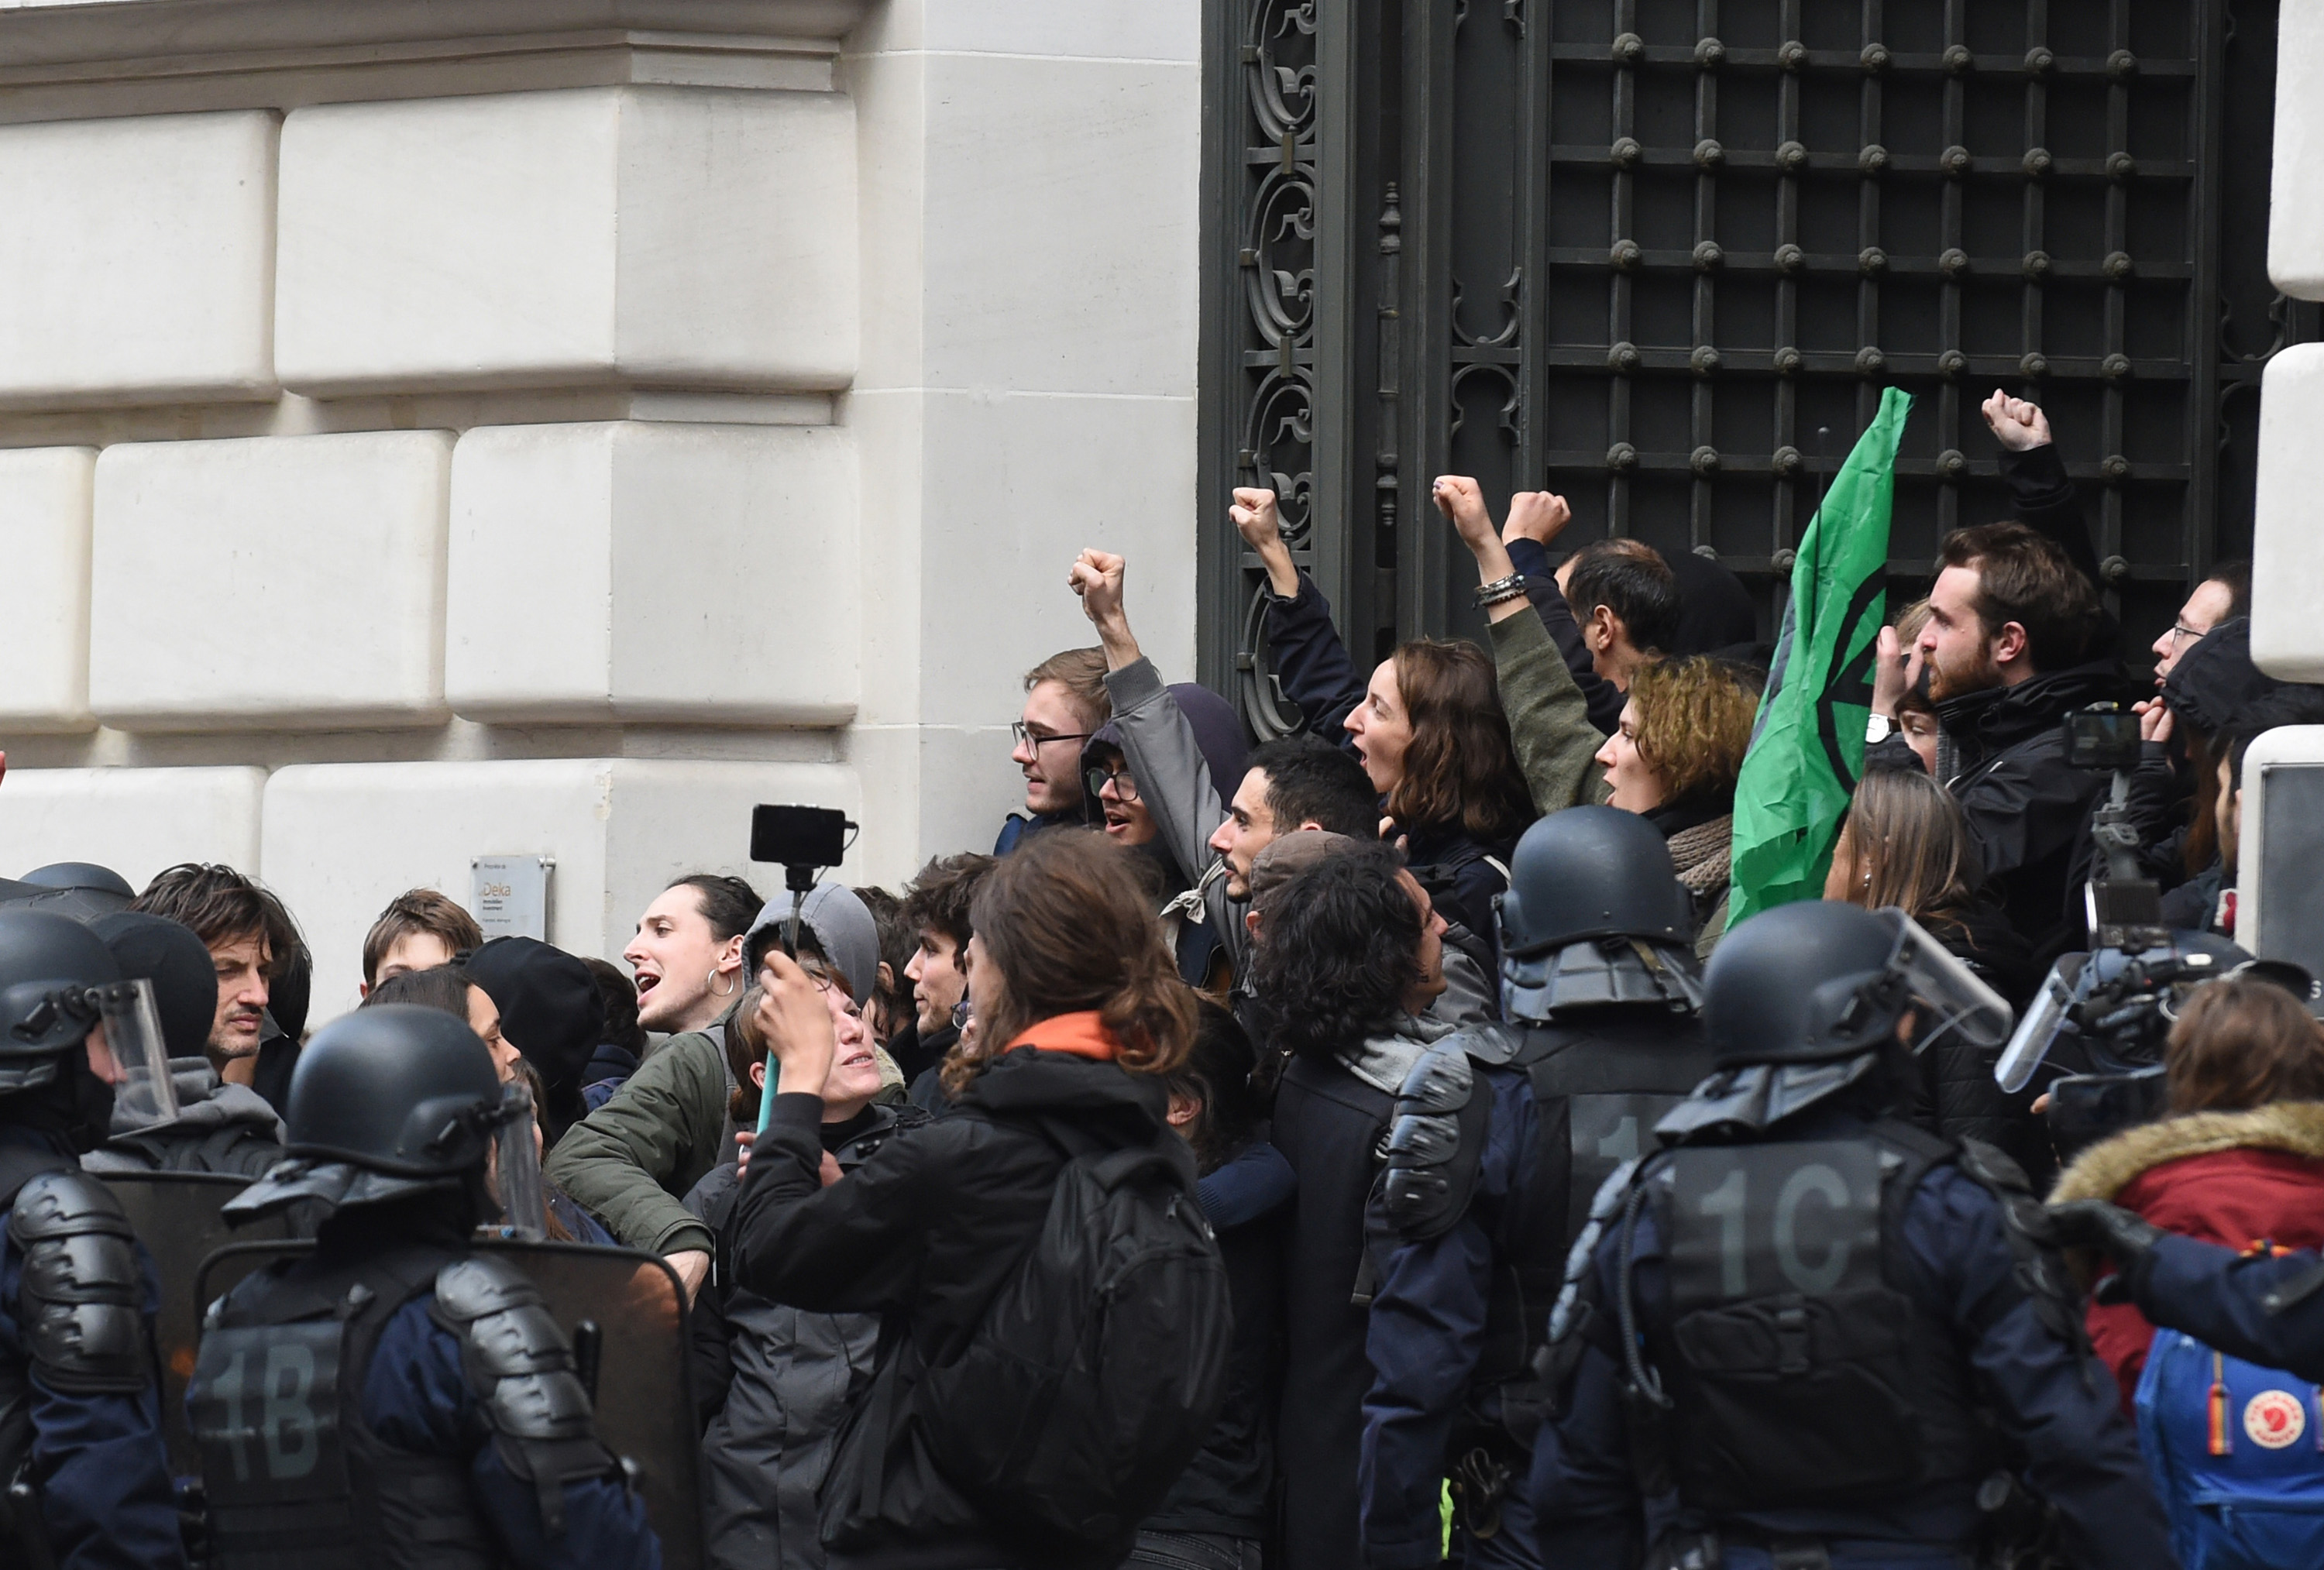 BlackRock’s Paris Office Barricaded by Climate Activists - Bloomberg